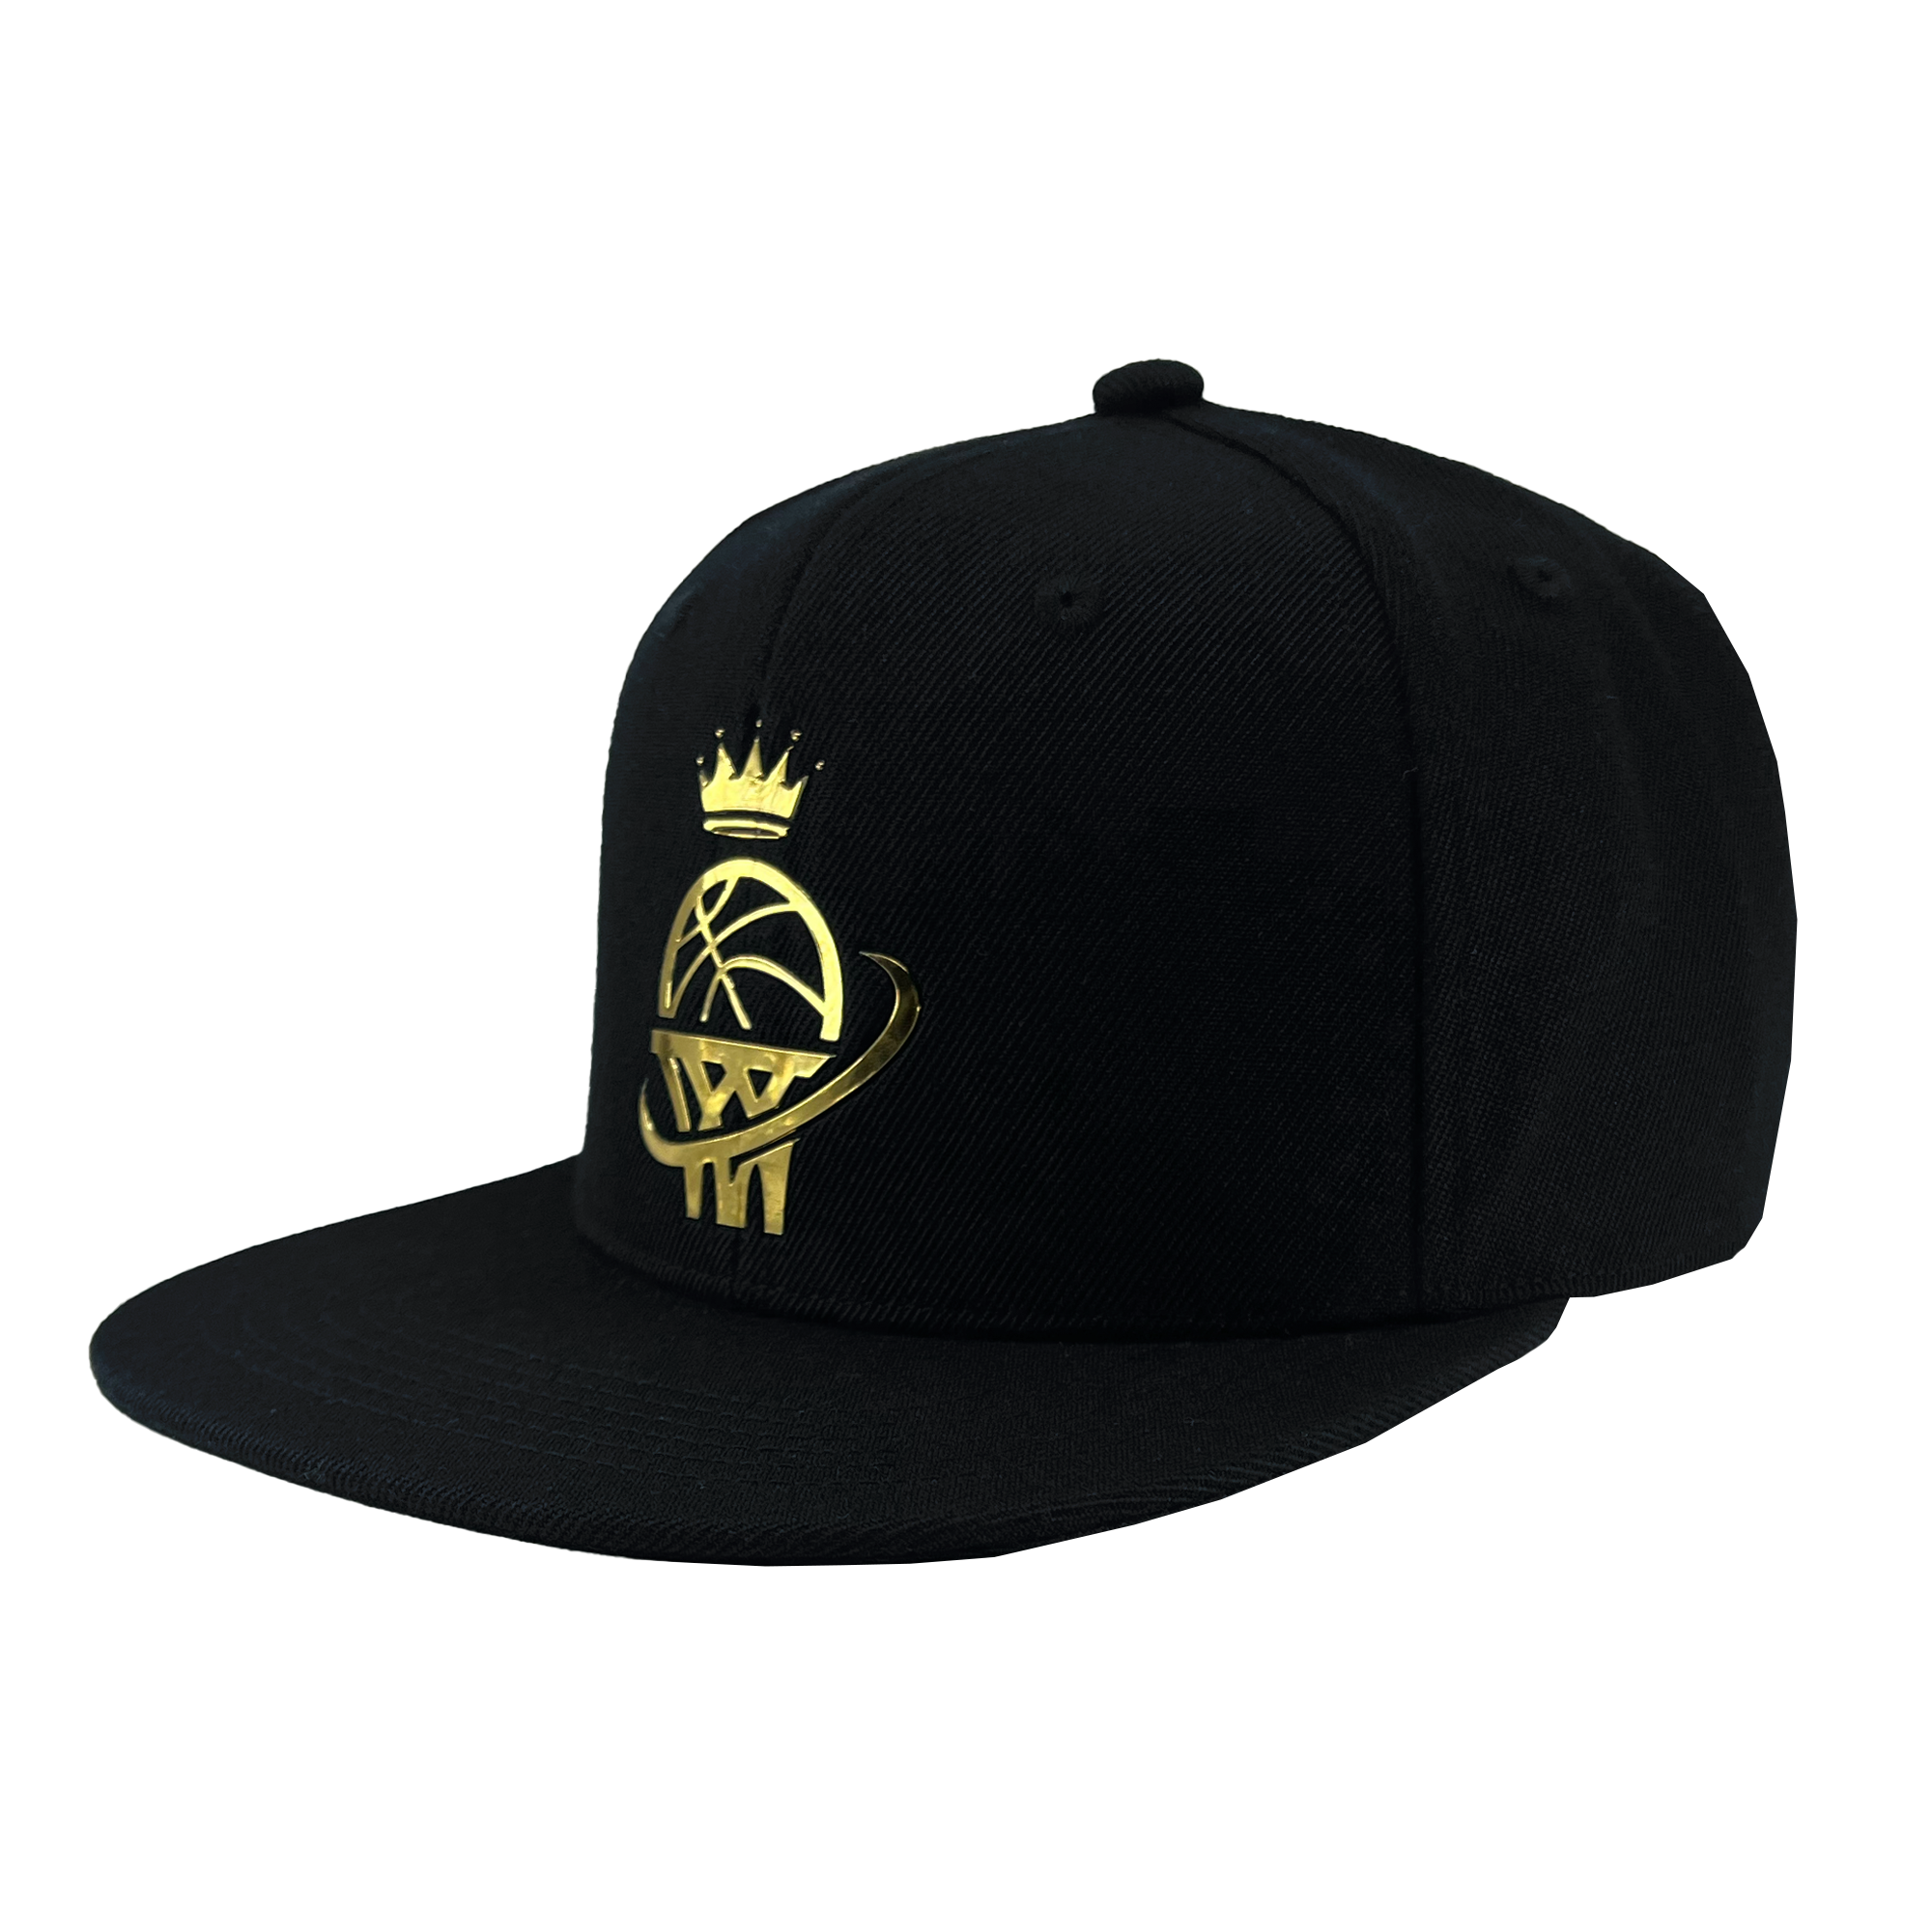 Side angled view of a black snapback hat  with gold WPBA logo on the front crown.